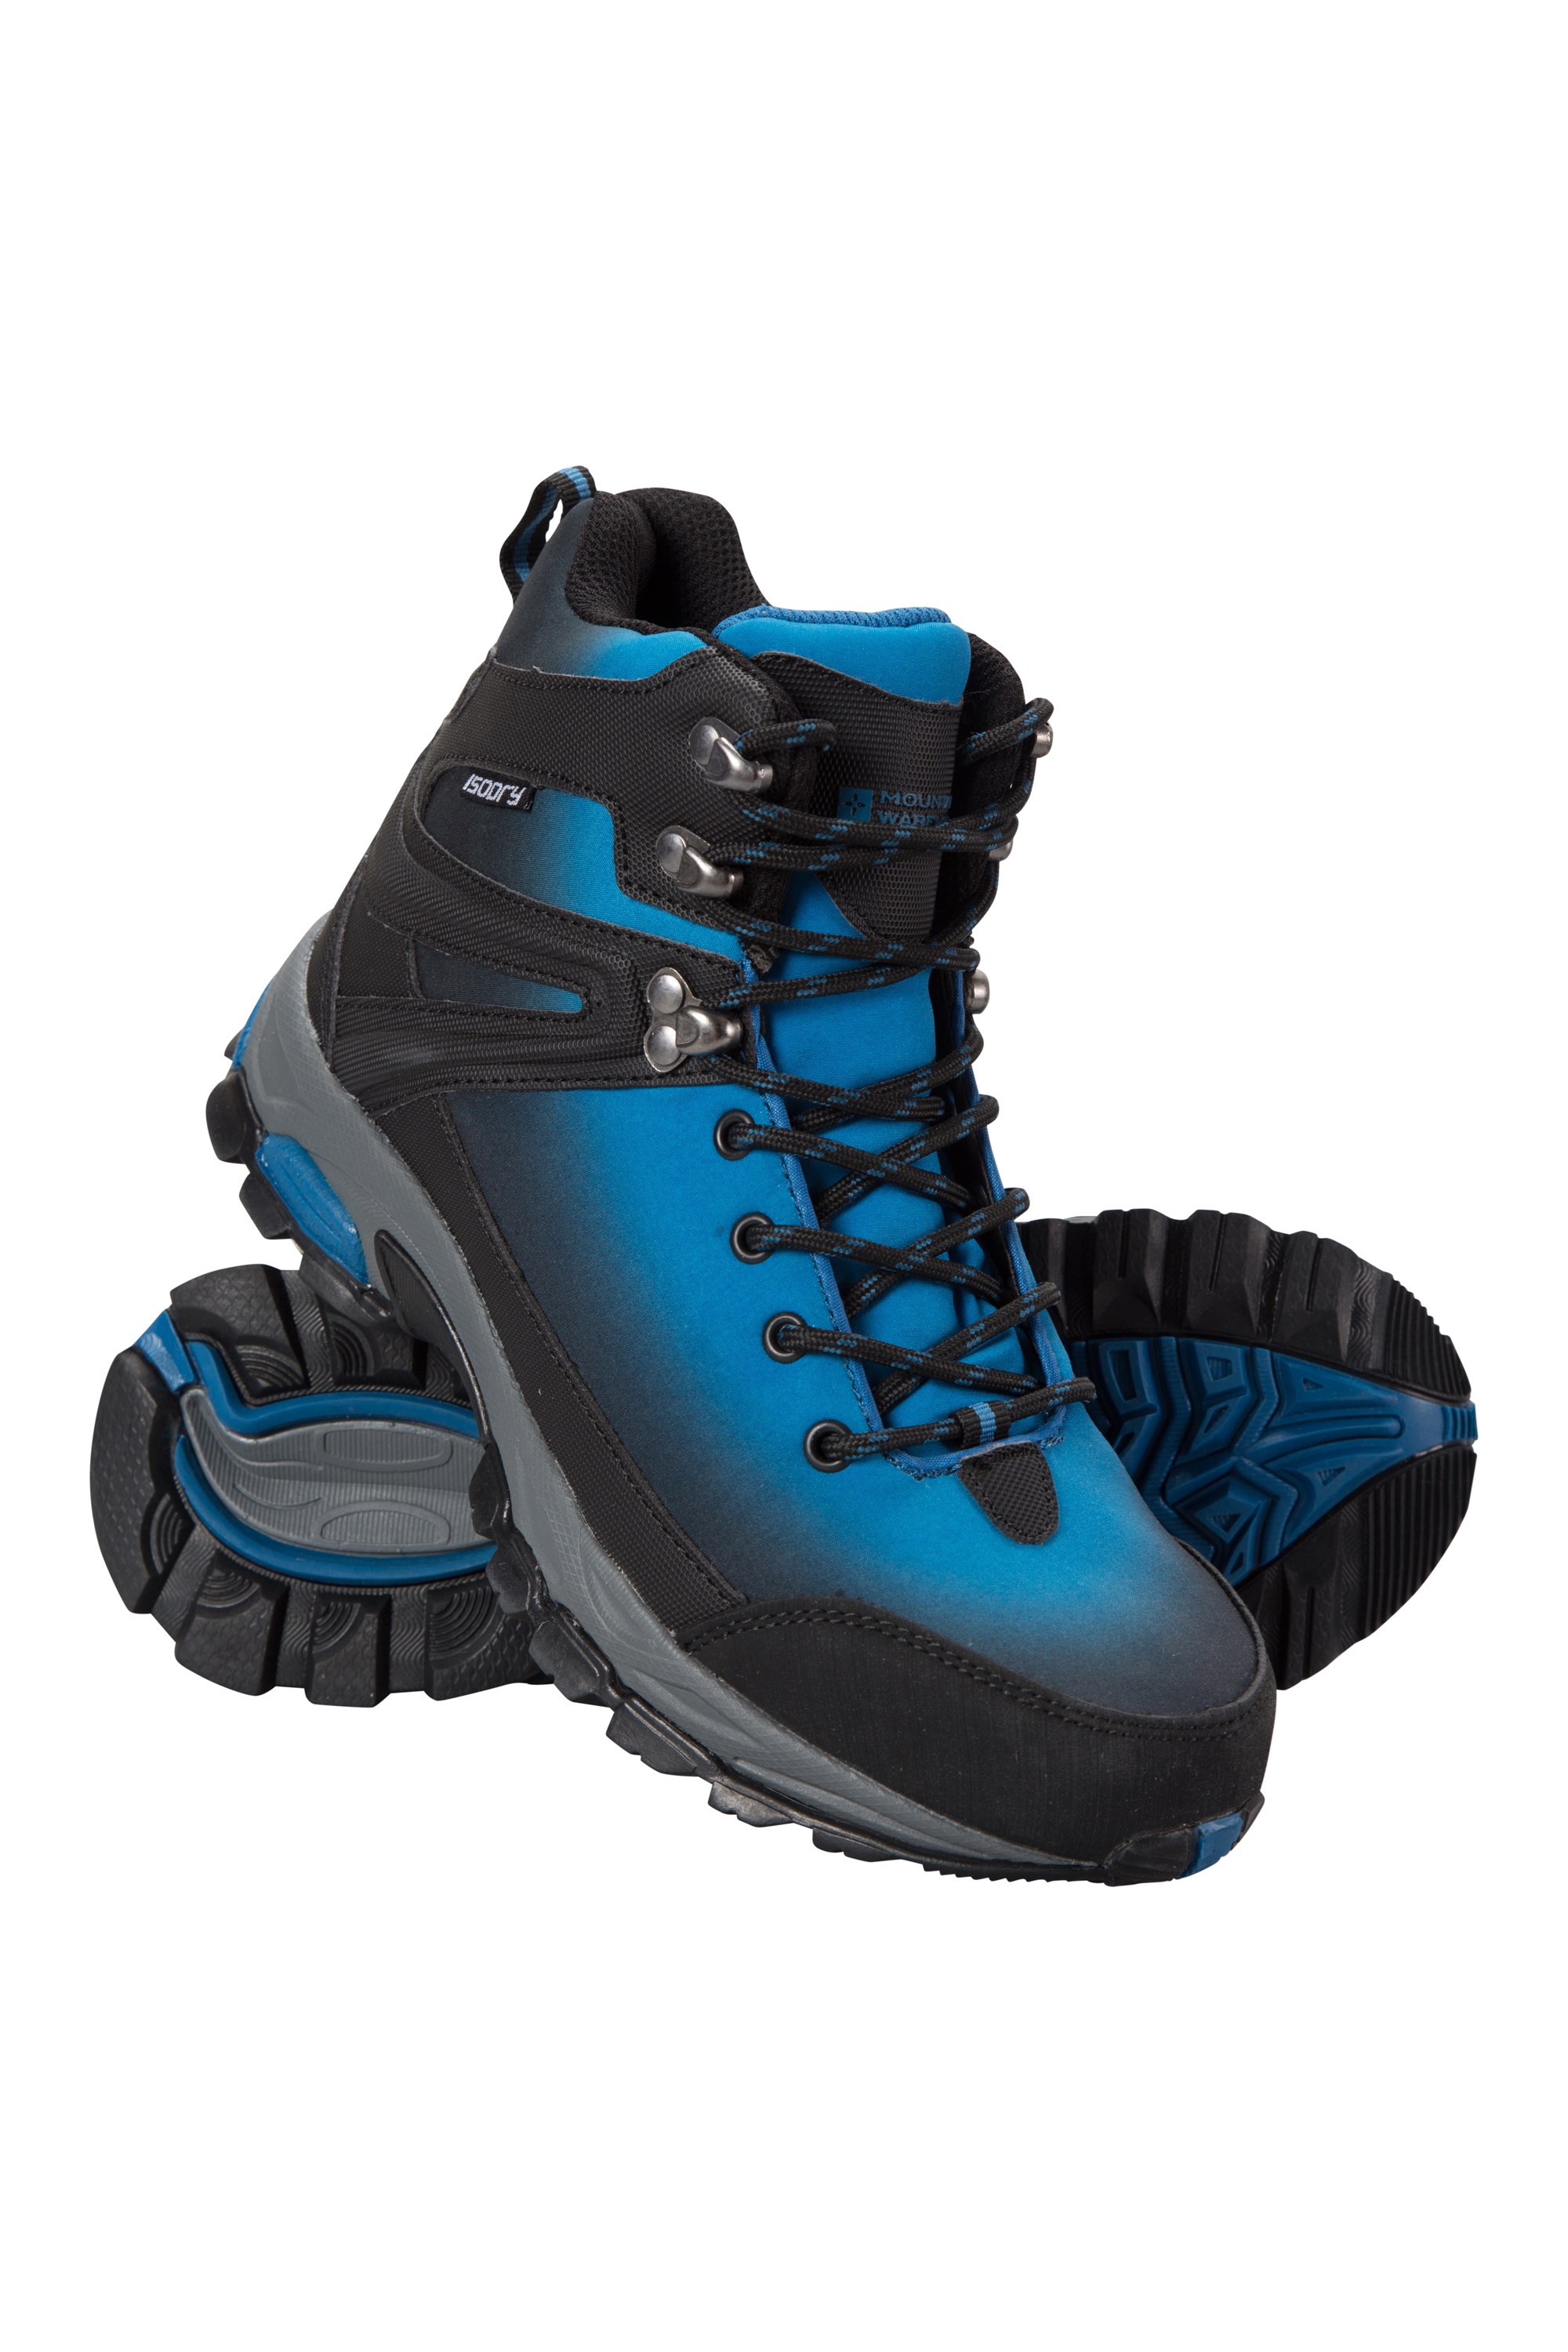 Mountain Warehouse Intrepid Waterproof Softshell Womens Boots Teal